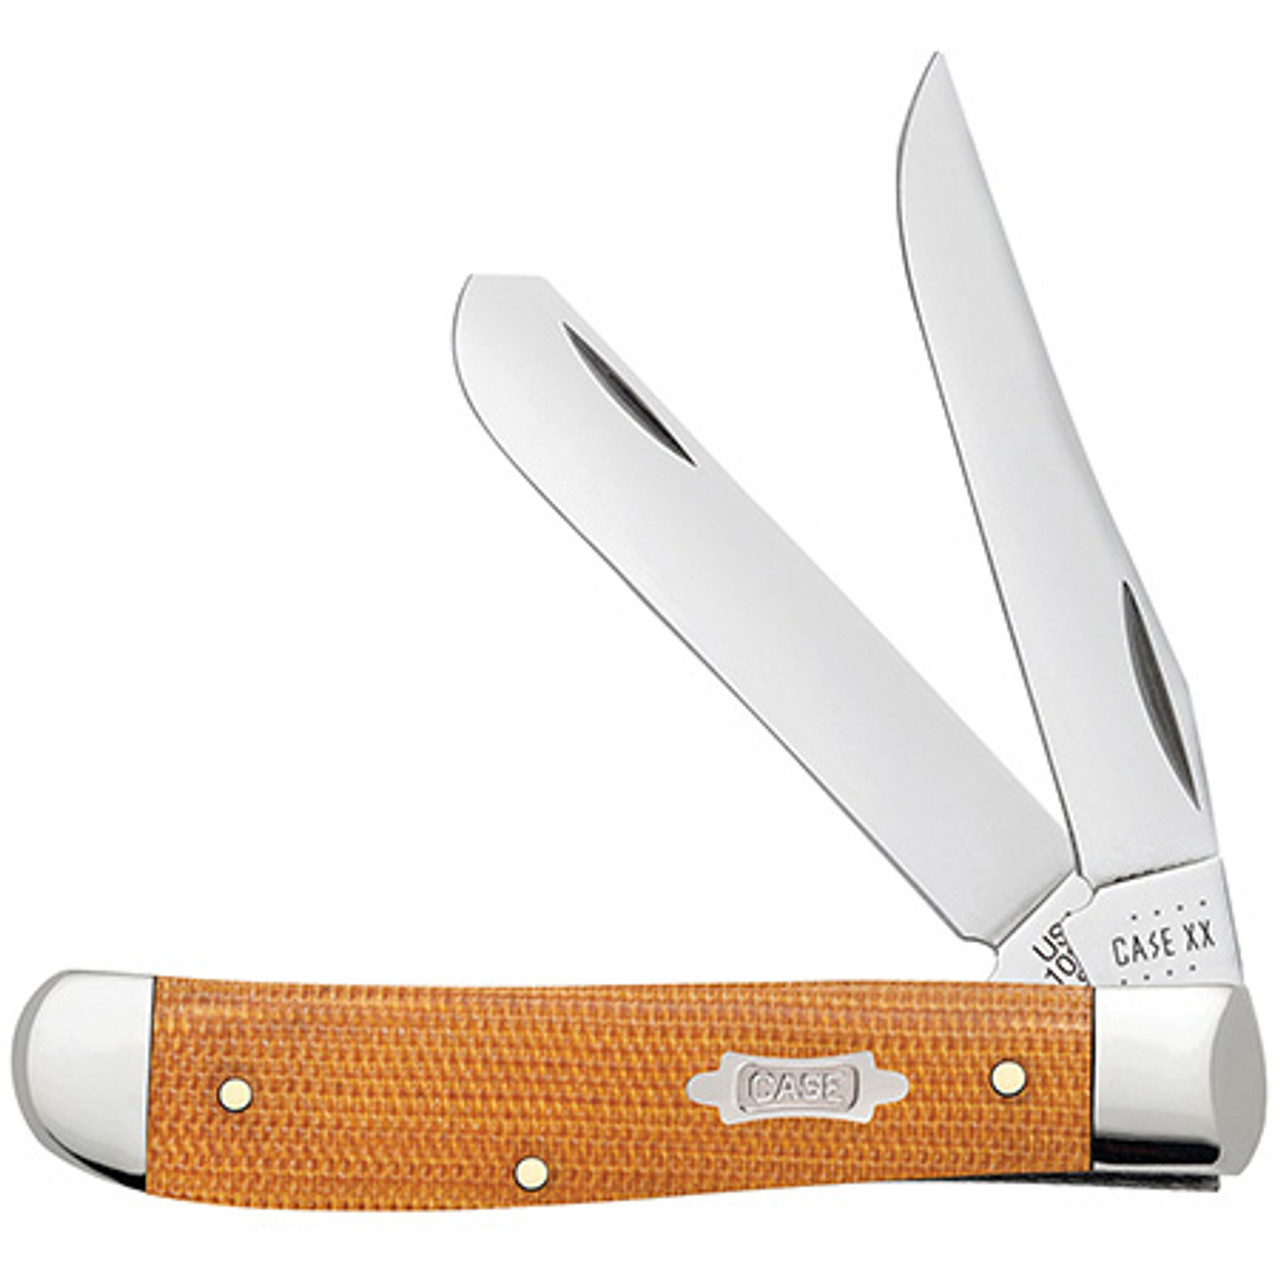 Case Mini Trapper 23695- Tru-Sharp Stainless Steel Clip, Clip and Spey Blade, Natural Canvas Micarta Handle (10207 SS)